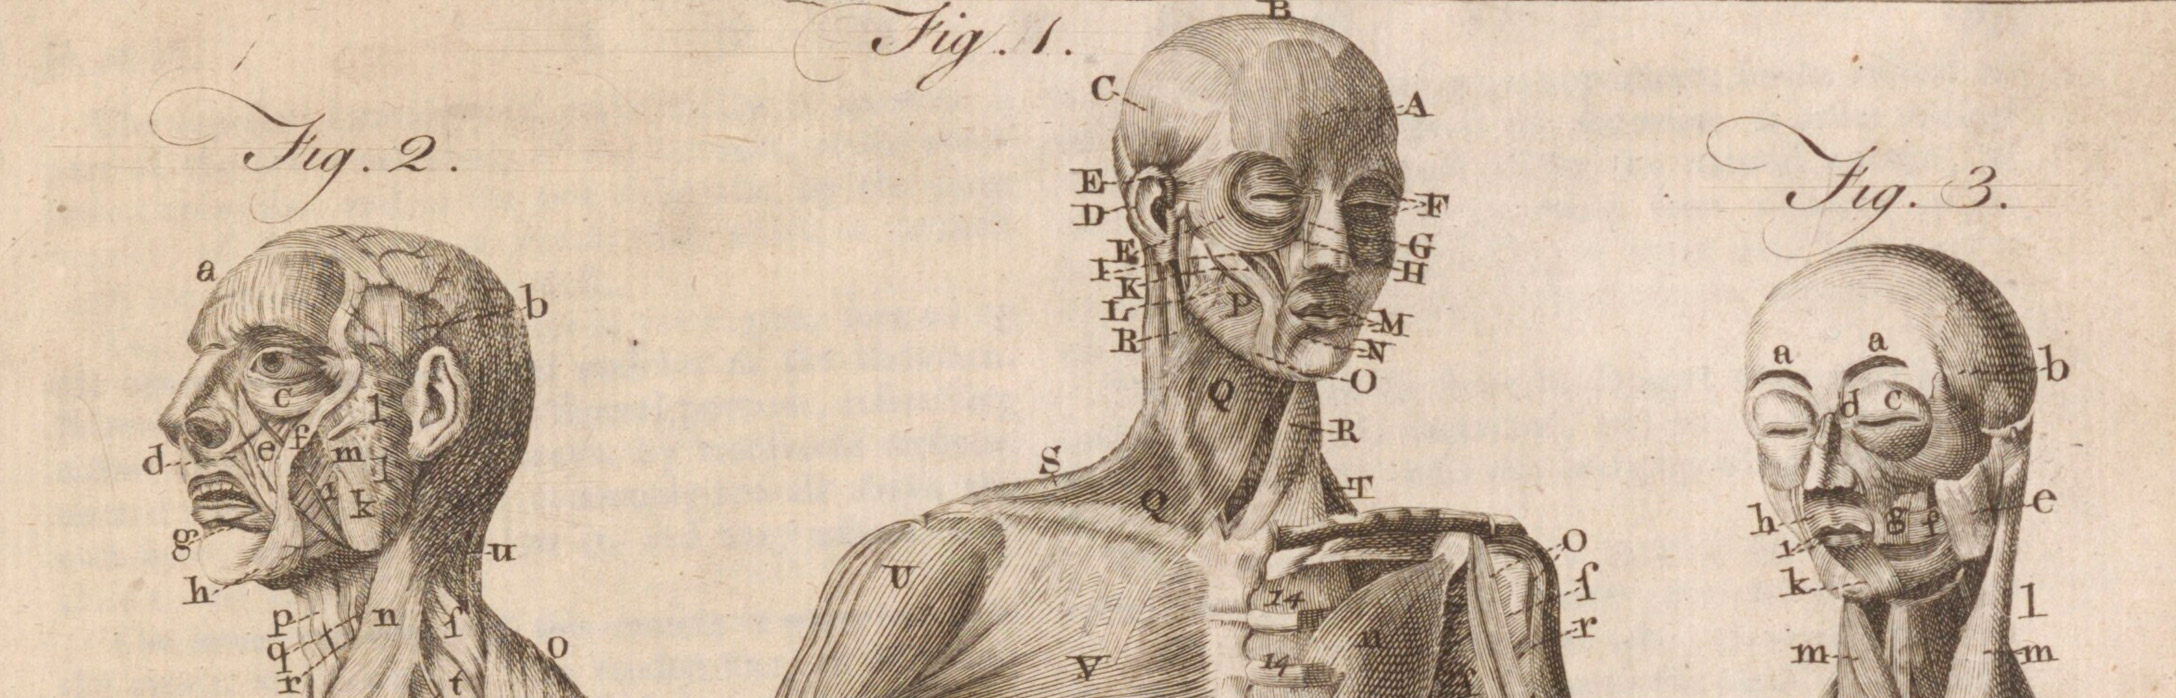 Plate XV in the anatomy section of volume one of the Encyclopaedia Britannica published in 1771.